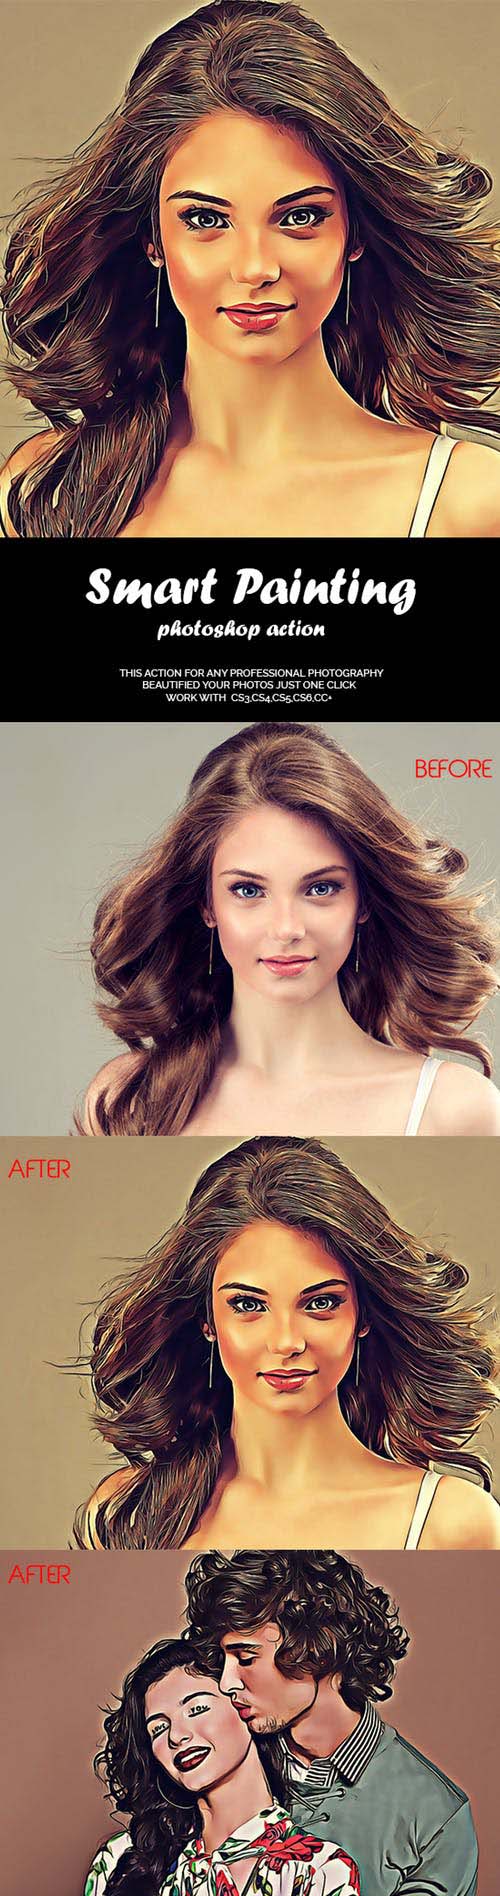 Smart Painting Photoshop Action 21139558